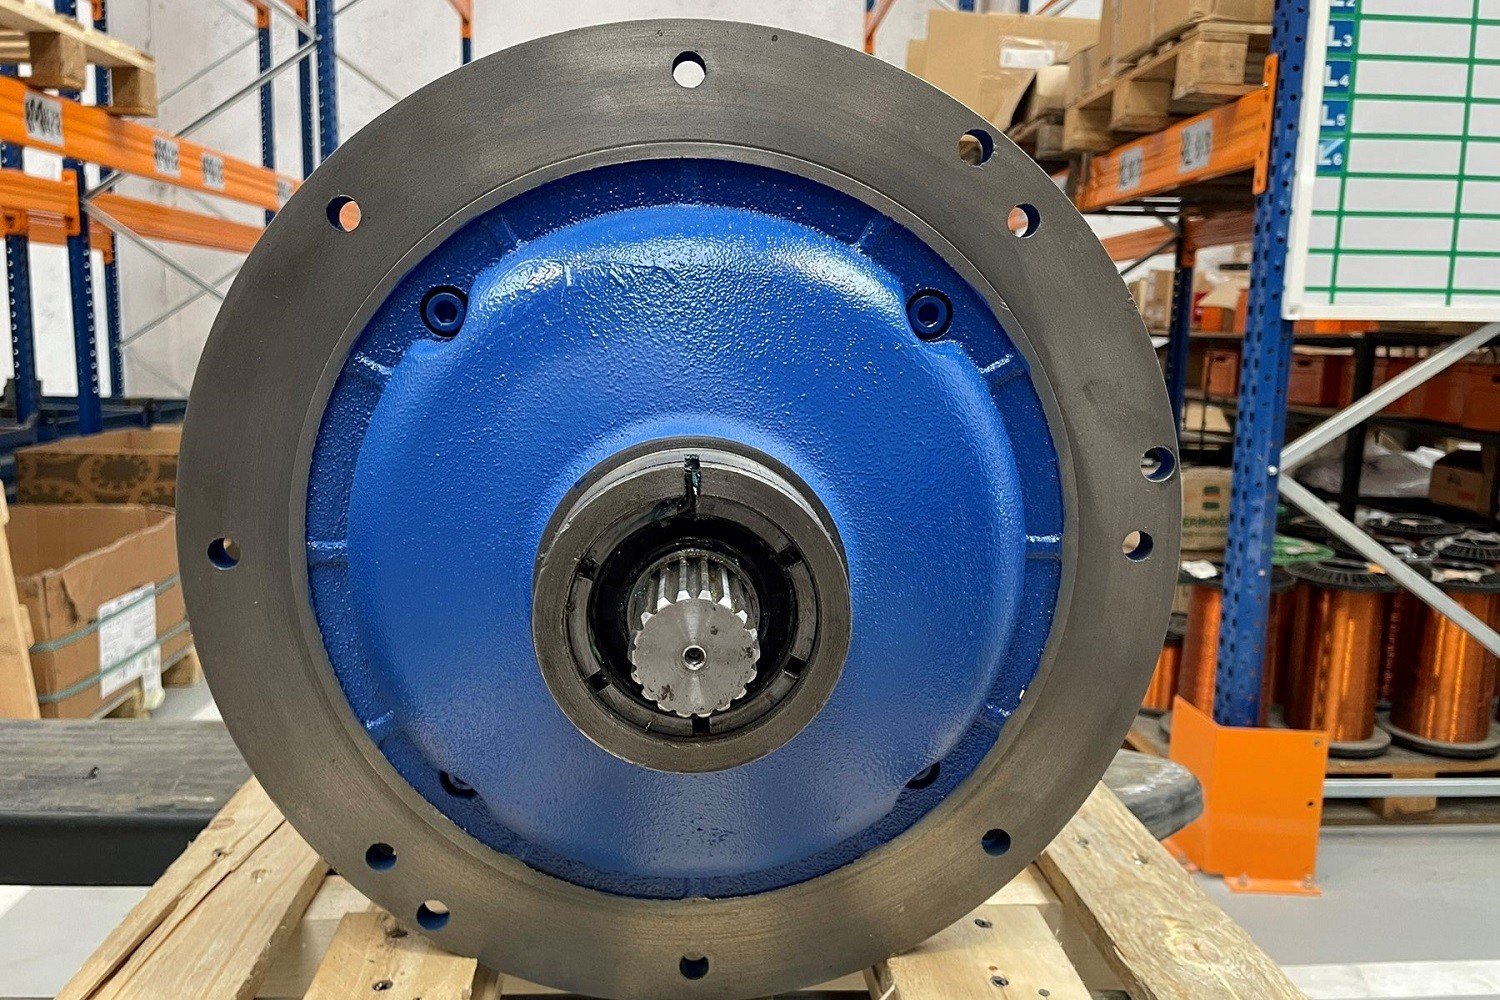 New 6-pole conical motor for hoists with 5-ton load capacity